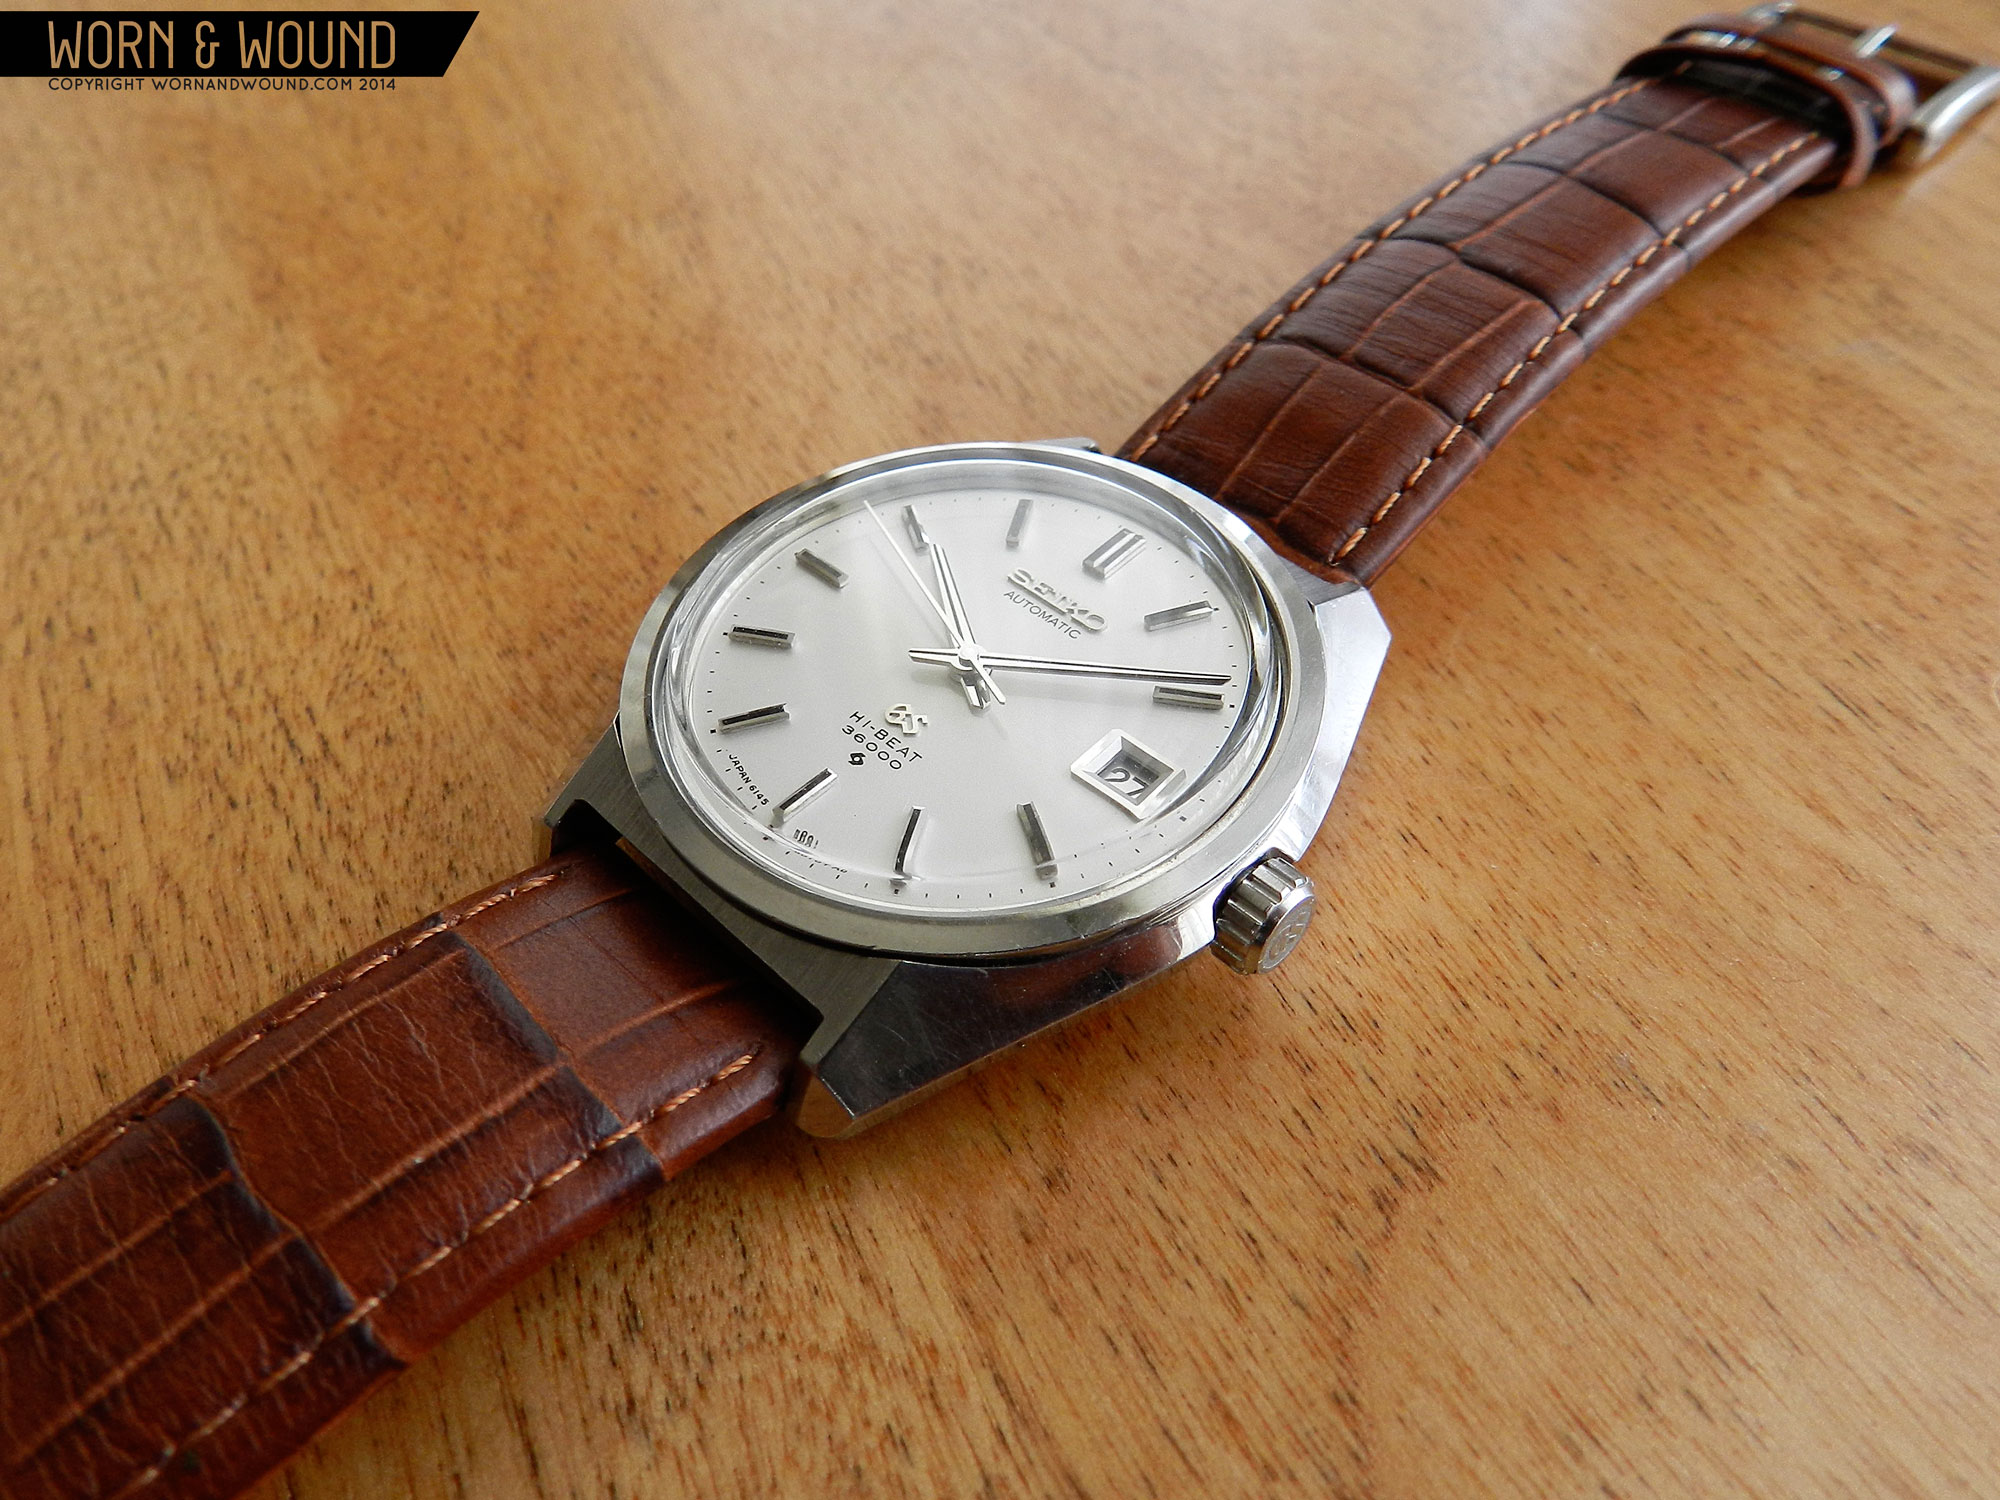 Affordable Vintage: 1970 Grand Seiko 61GS 6145-8000 - Worn & Wound